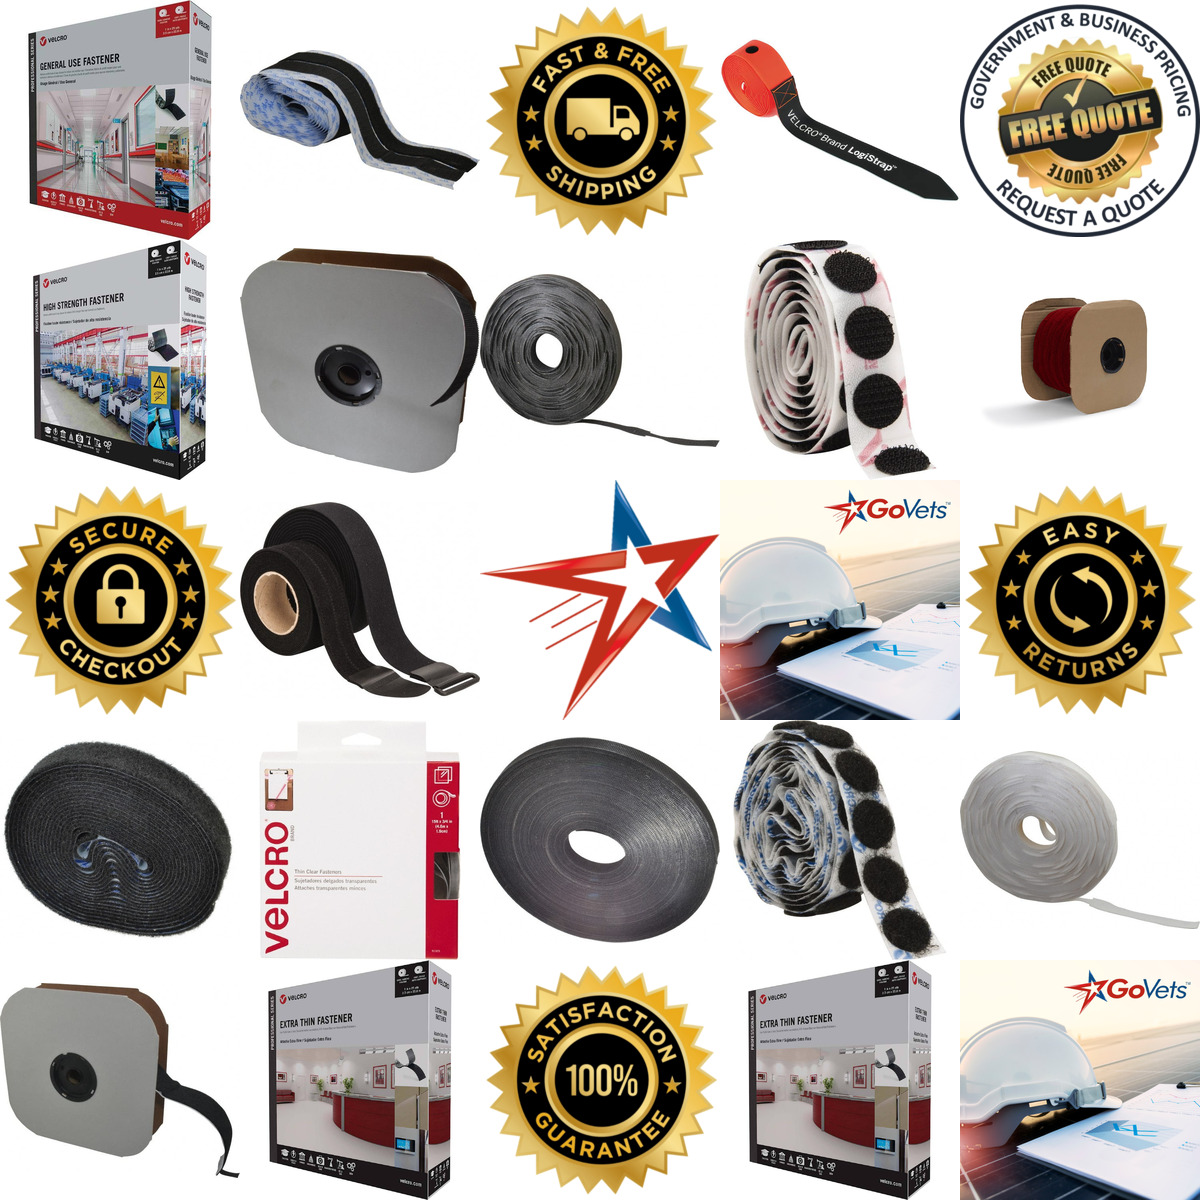 A selection of velcro.brand products on GoVets